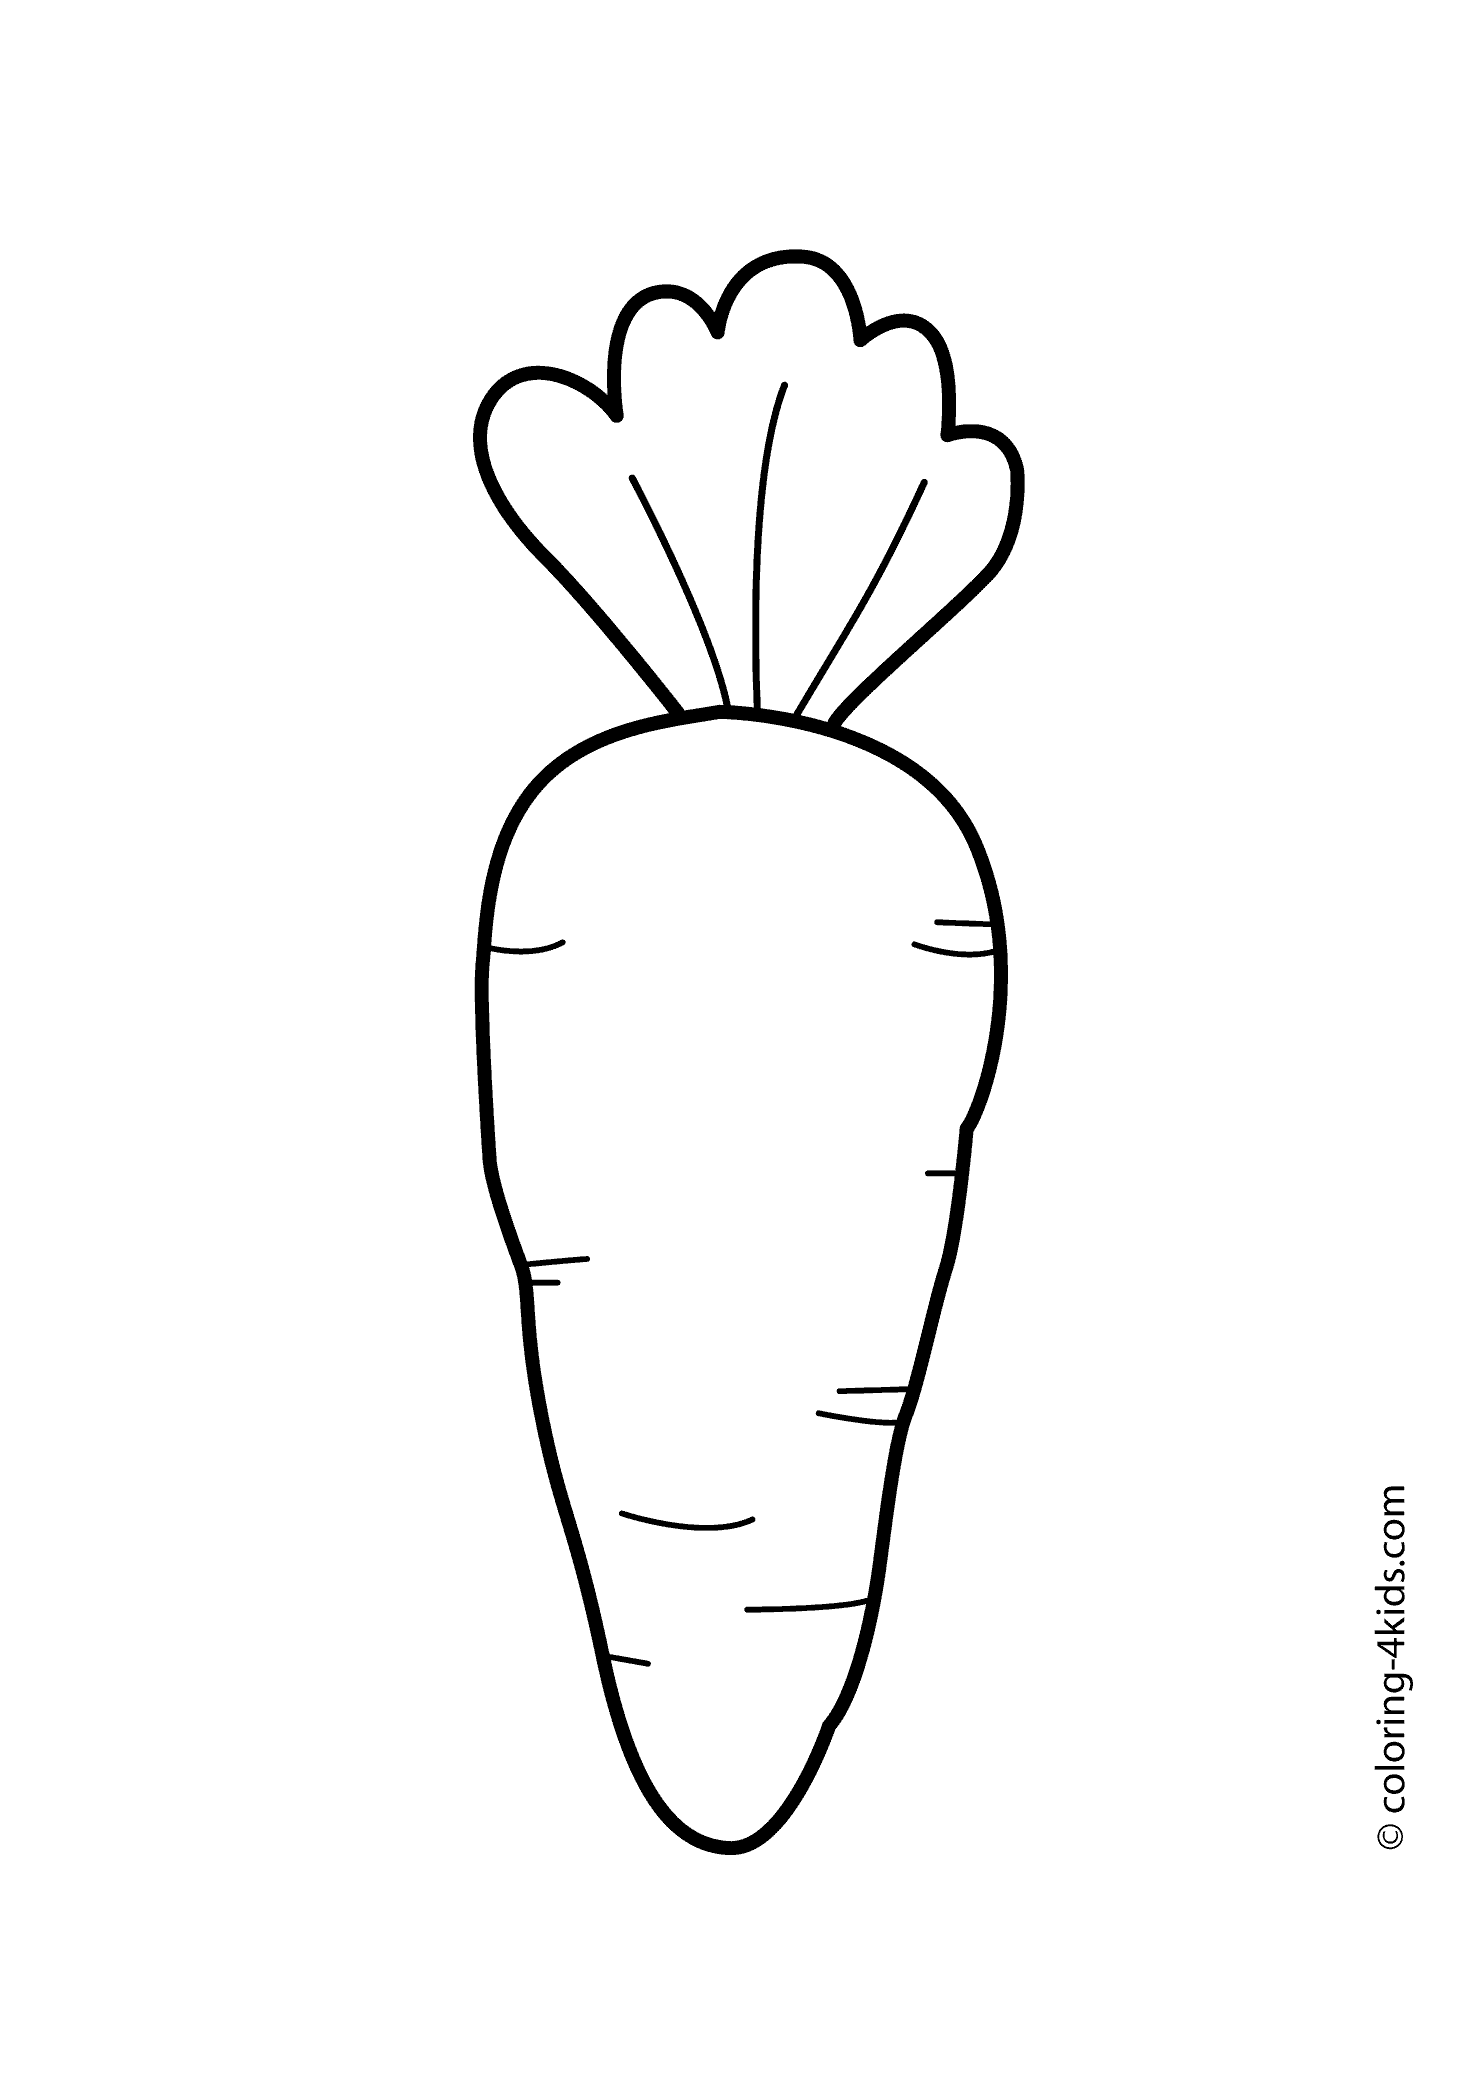 Coloring Page For Carrot - Coloring Pages For All Ages